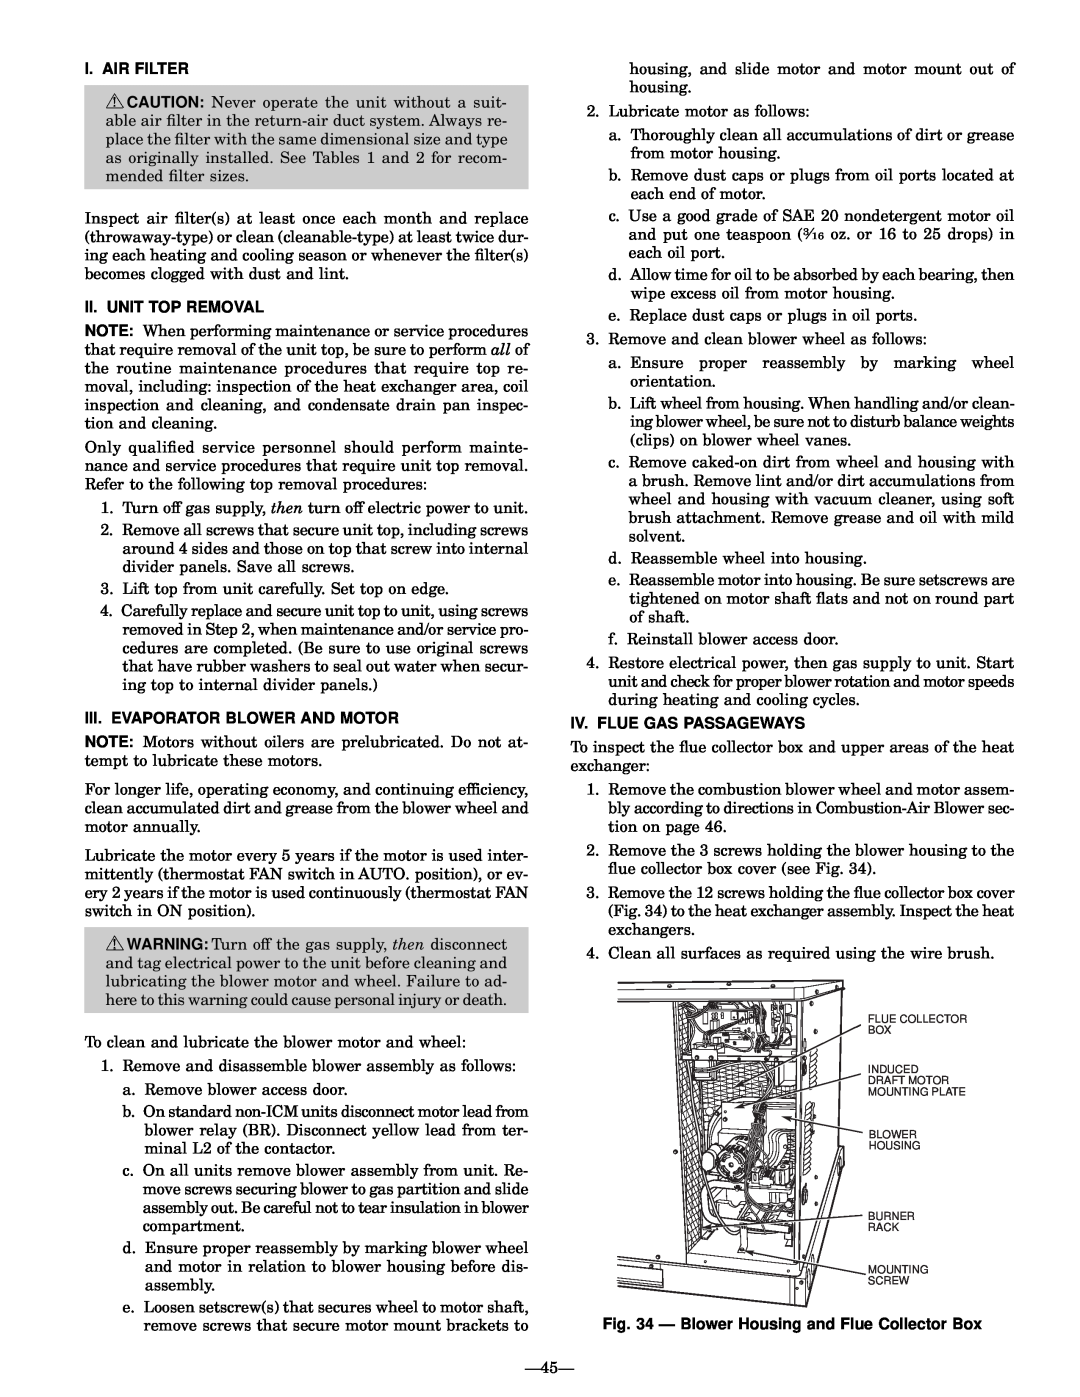 Bryant 589A, 588A user manual I. Air Filter, Ii. Unit Top Removal, Iii.Evaporator Blower And Motor, Iv. Flue Gas Passageways 